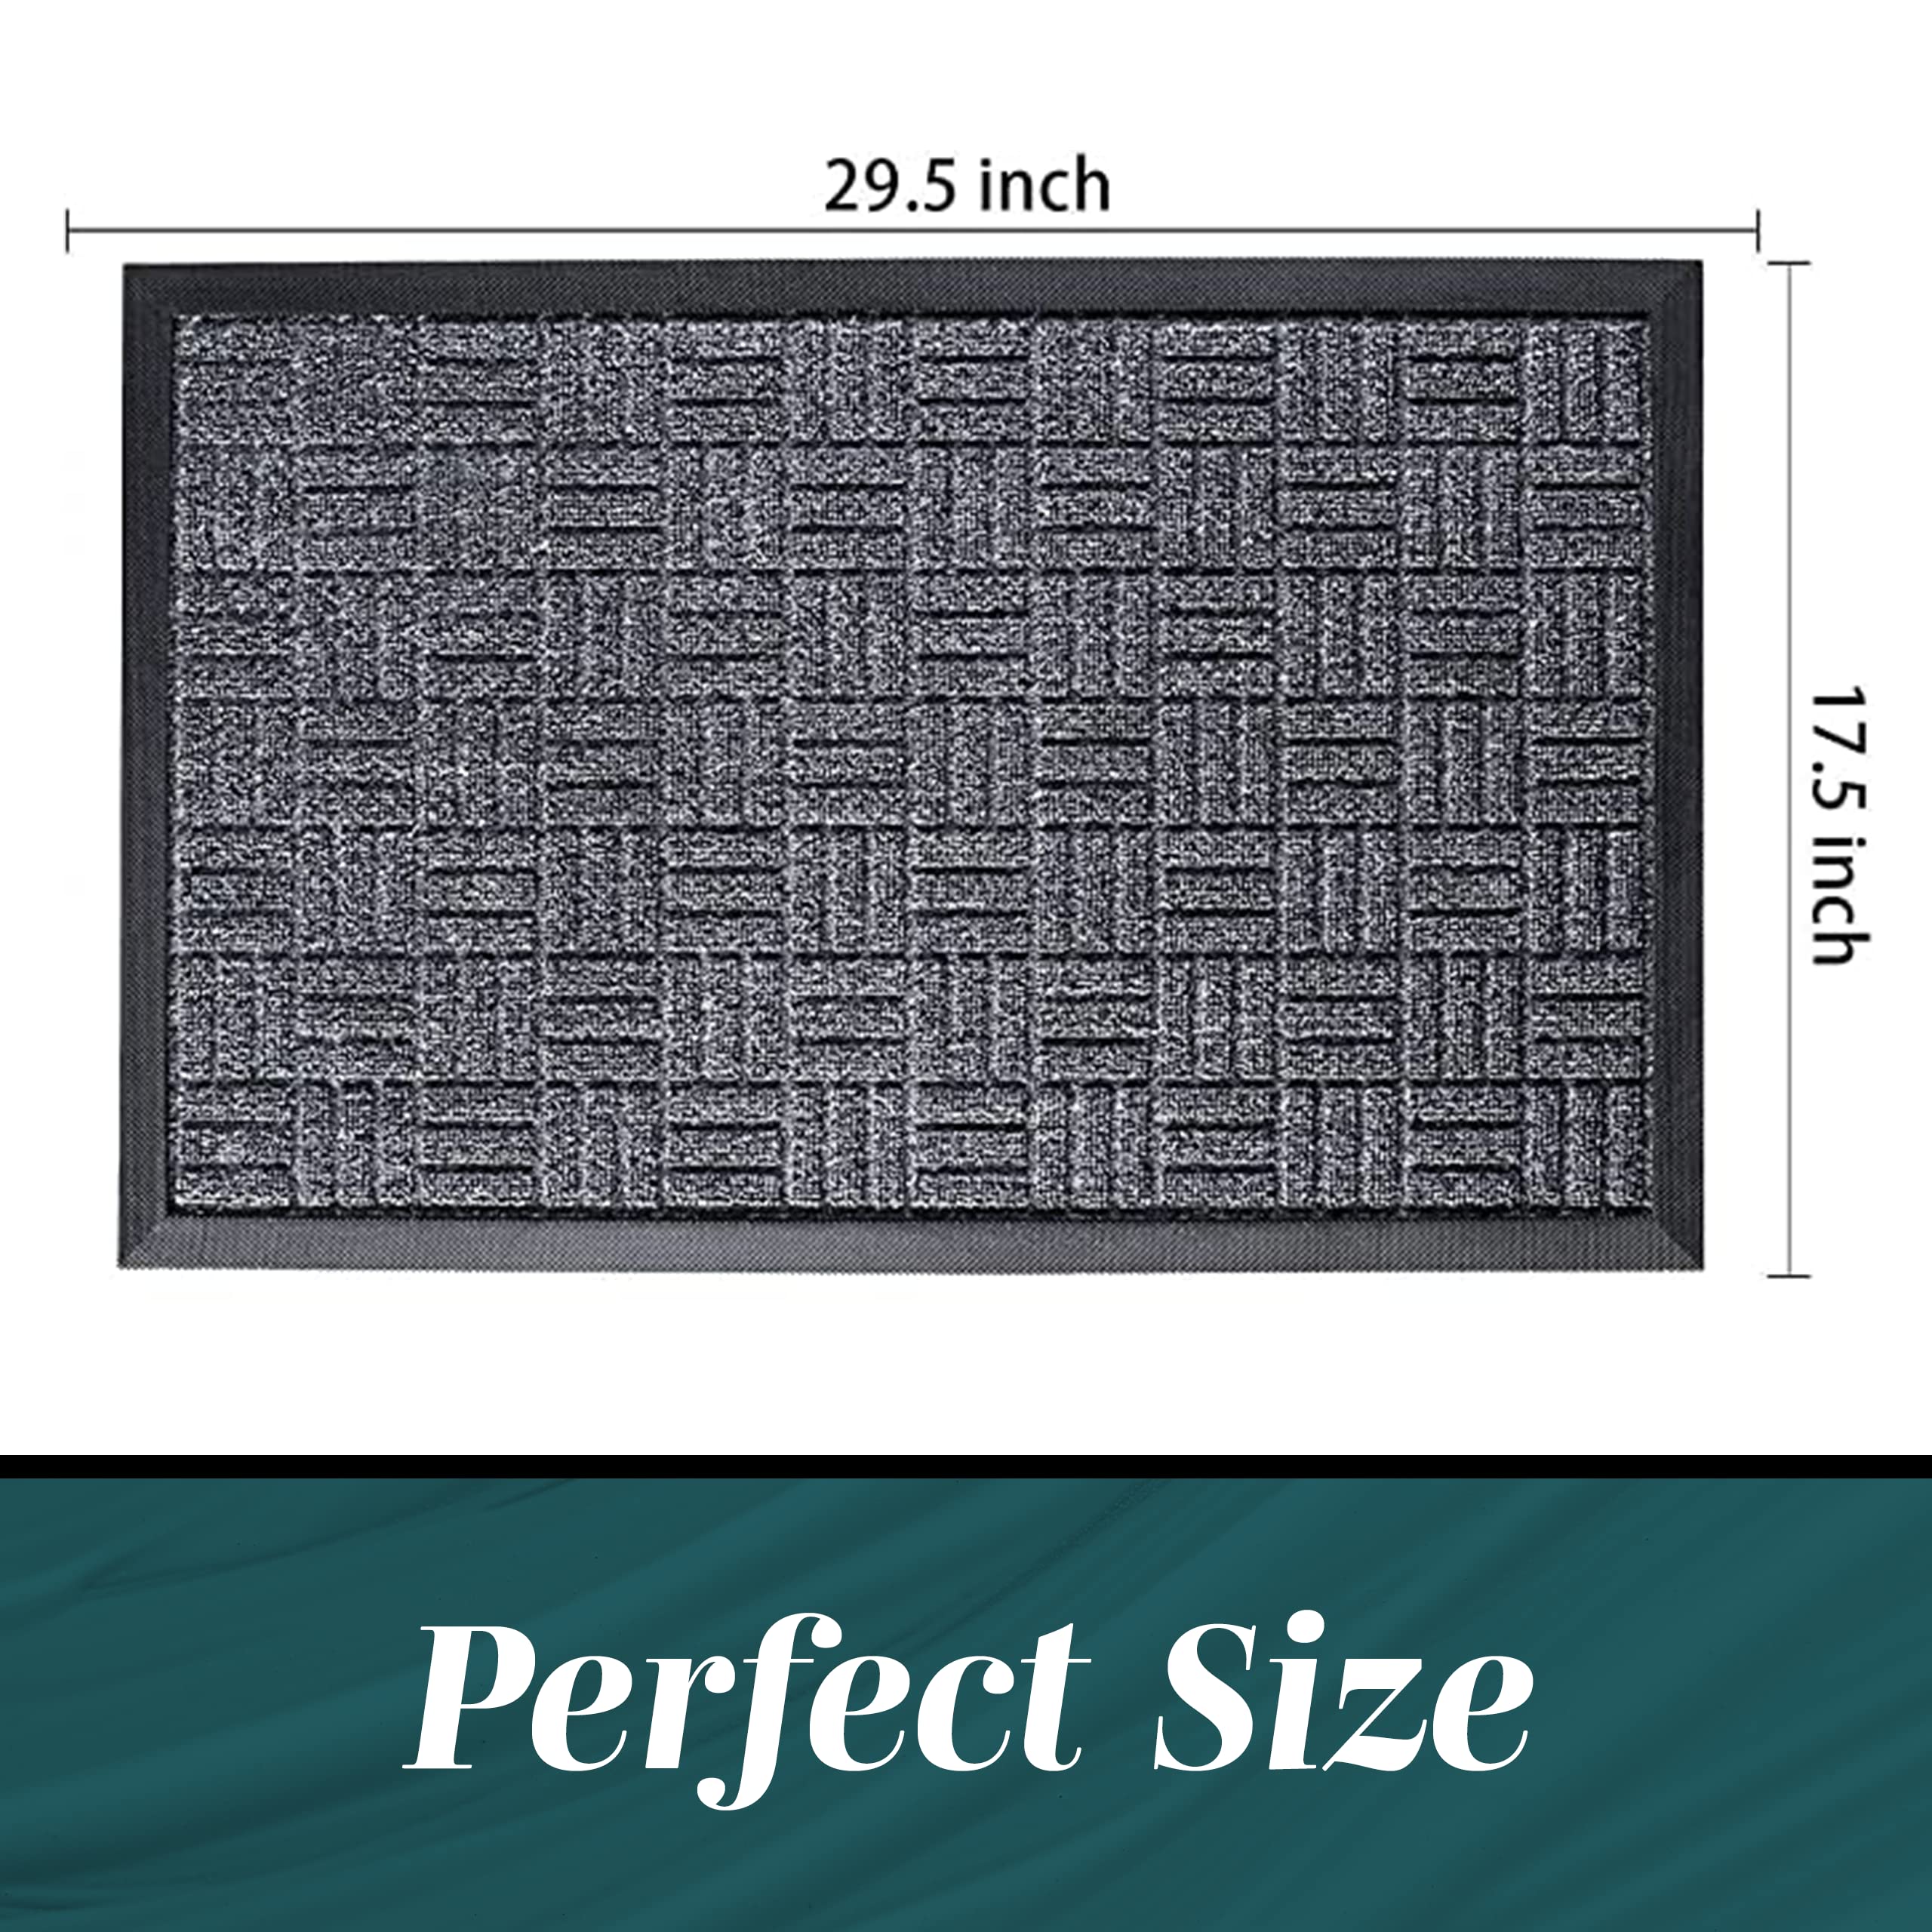 HOMWE Front Door Mats, 2 Pc Set, 29.5 x 17, All Weather Entry and Back Yard, Indoor and Outdoor Safe, Slip Resistant Rubber Backing, Absorbent and Waterproof, Dirt Trapping Rugs for Entryway